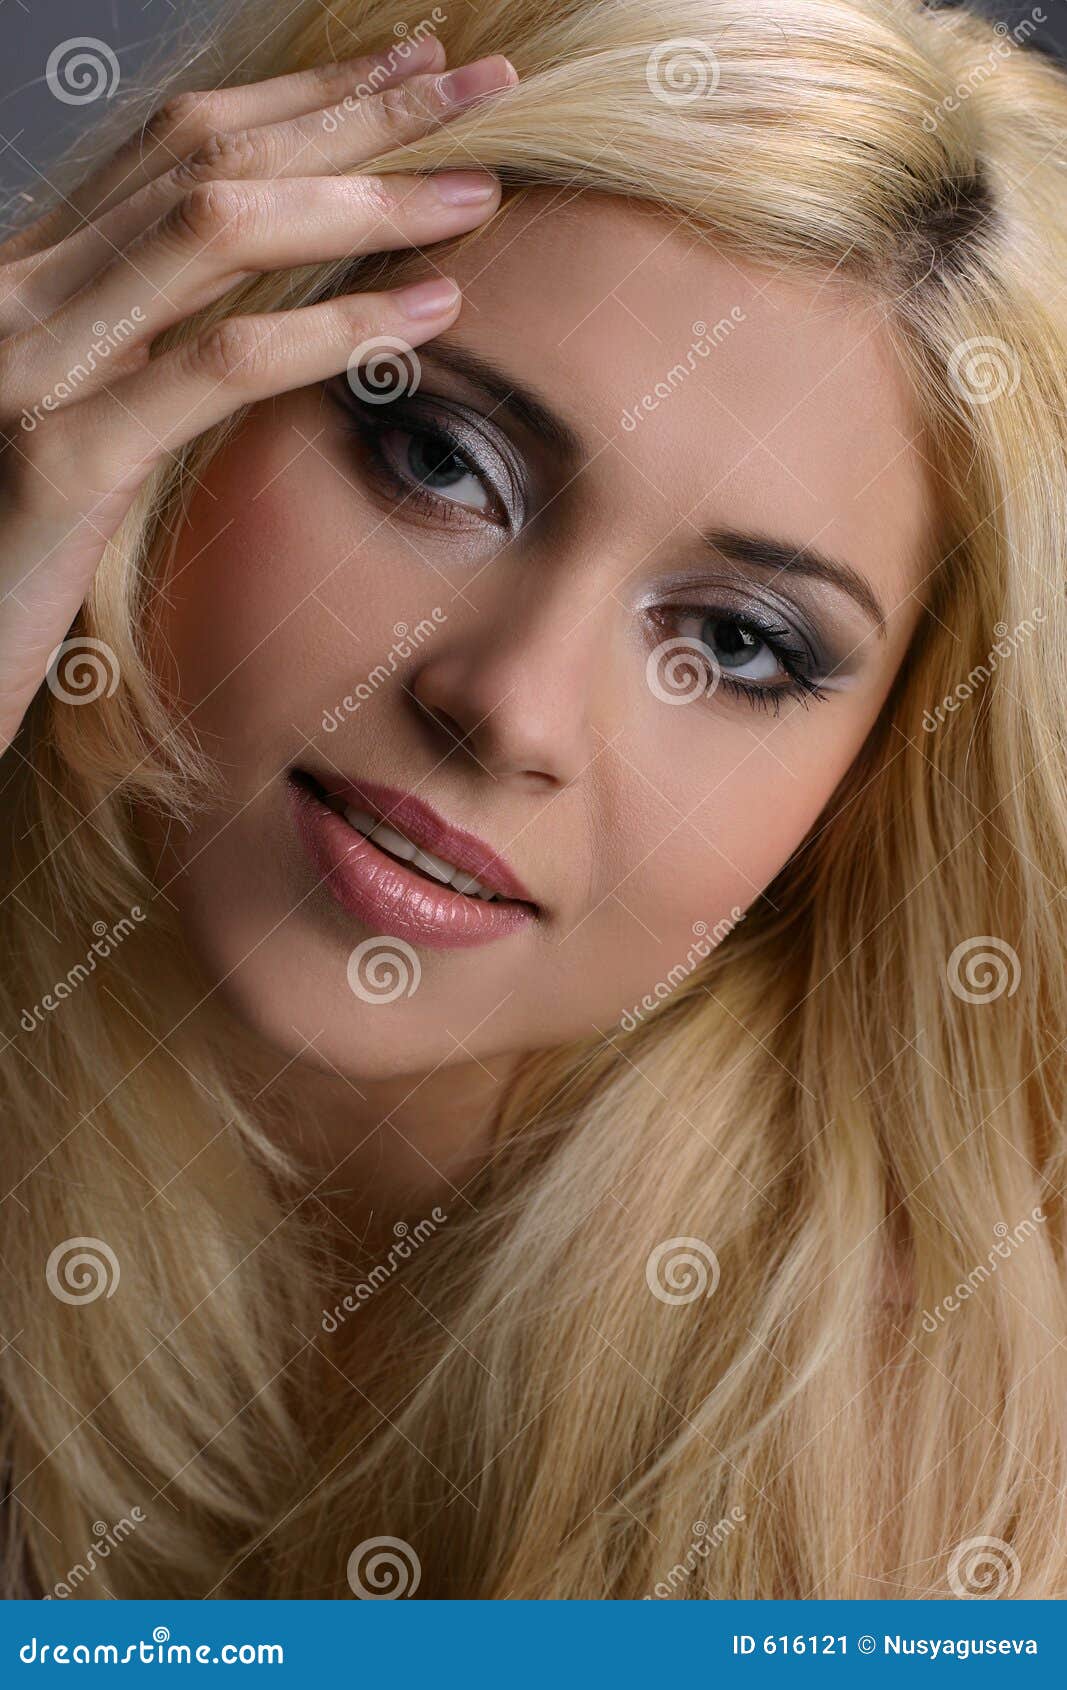 Blonde Sweet Looking Girl Stock Image Image Of Lovely 616121